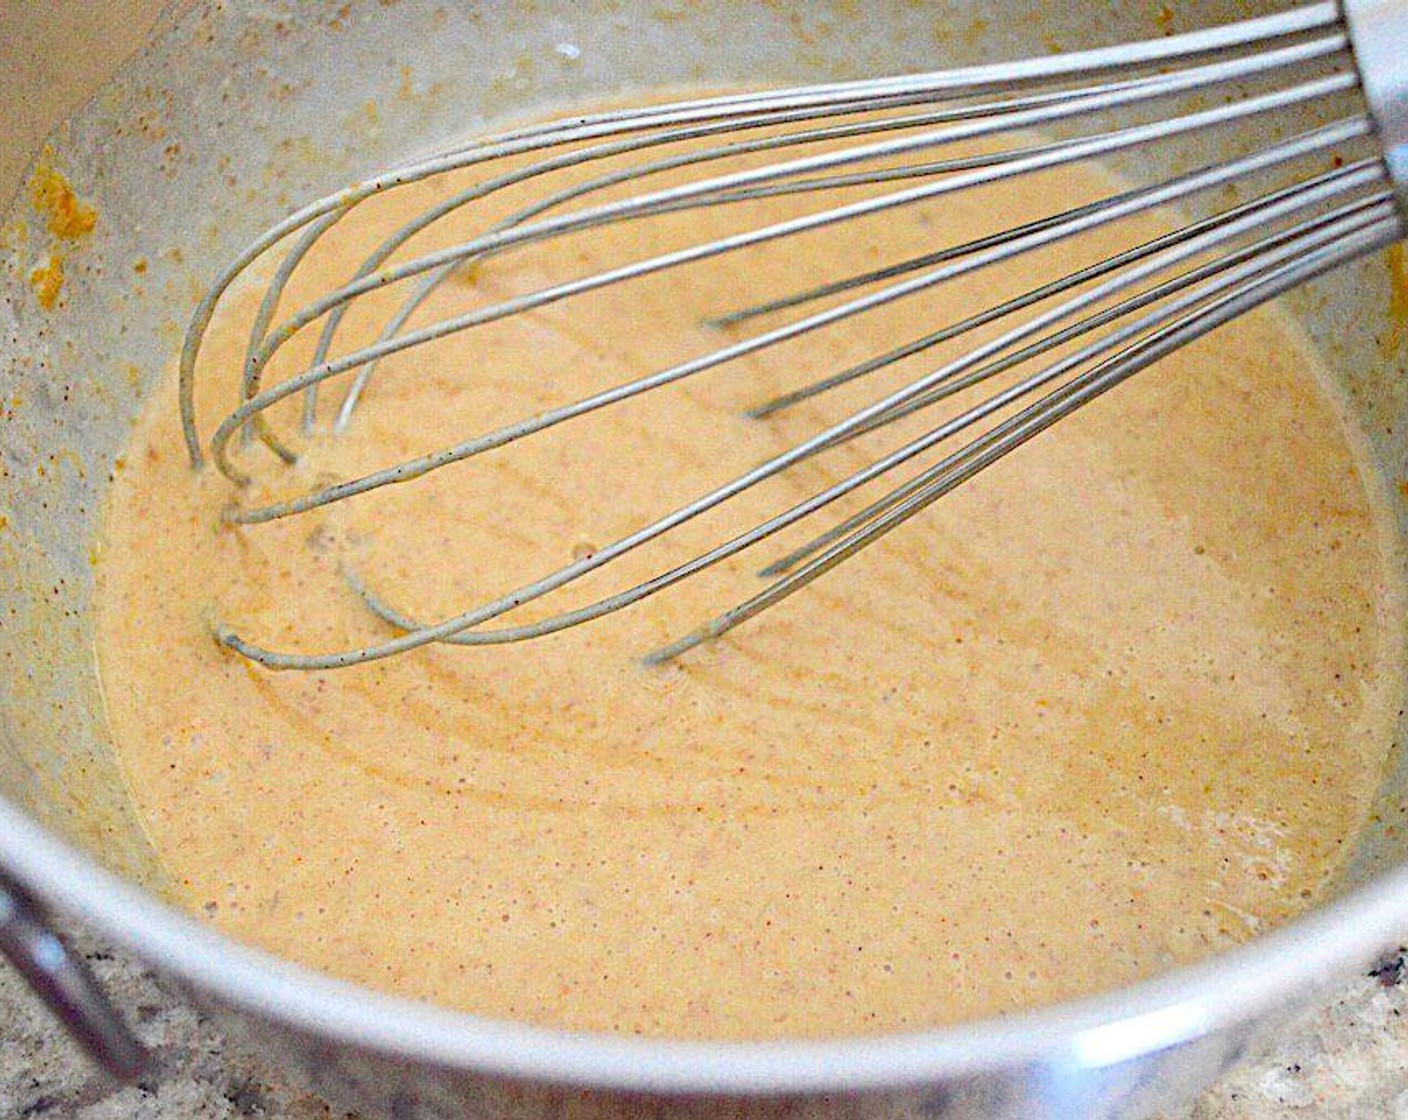 step 1 In a medium mixing bowl, whisk the Eggs (4), Heavy Cream (1/4 cup), Canned Pumpkin Purée (1/4 cup), Dark Brown Sugar (1/2 Tbsp), Pumpkin Pie Spice (1 tsp) and Salt (1 pinch) together until it is a thick, gorgeous batter.